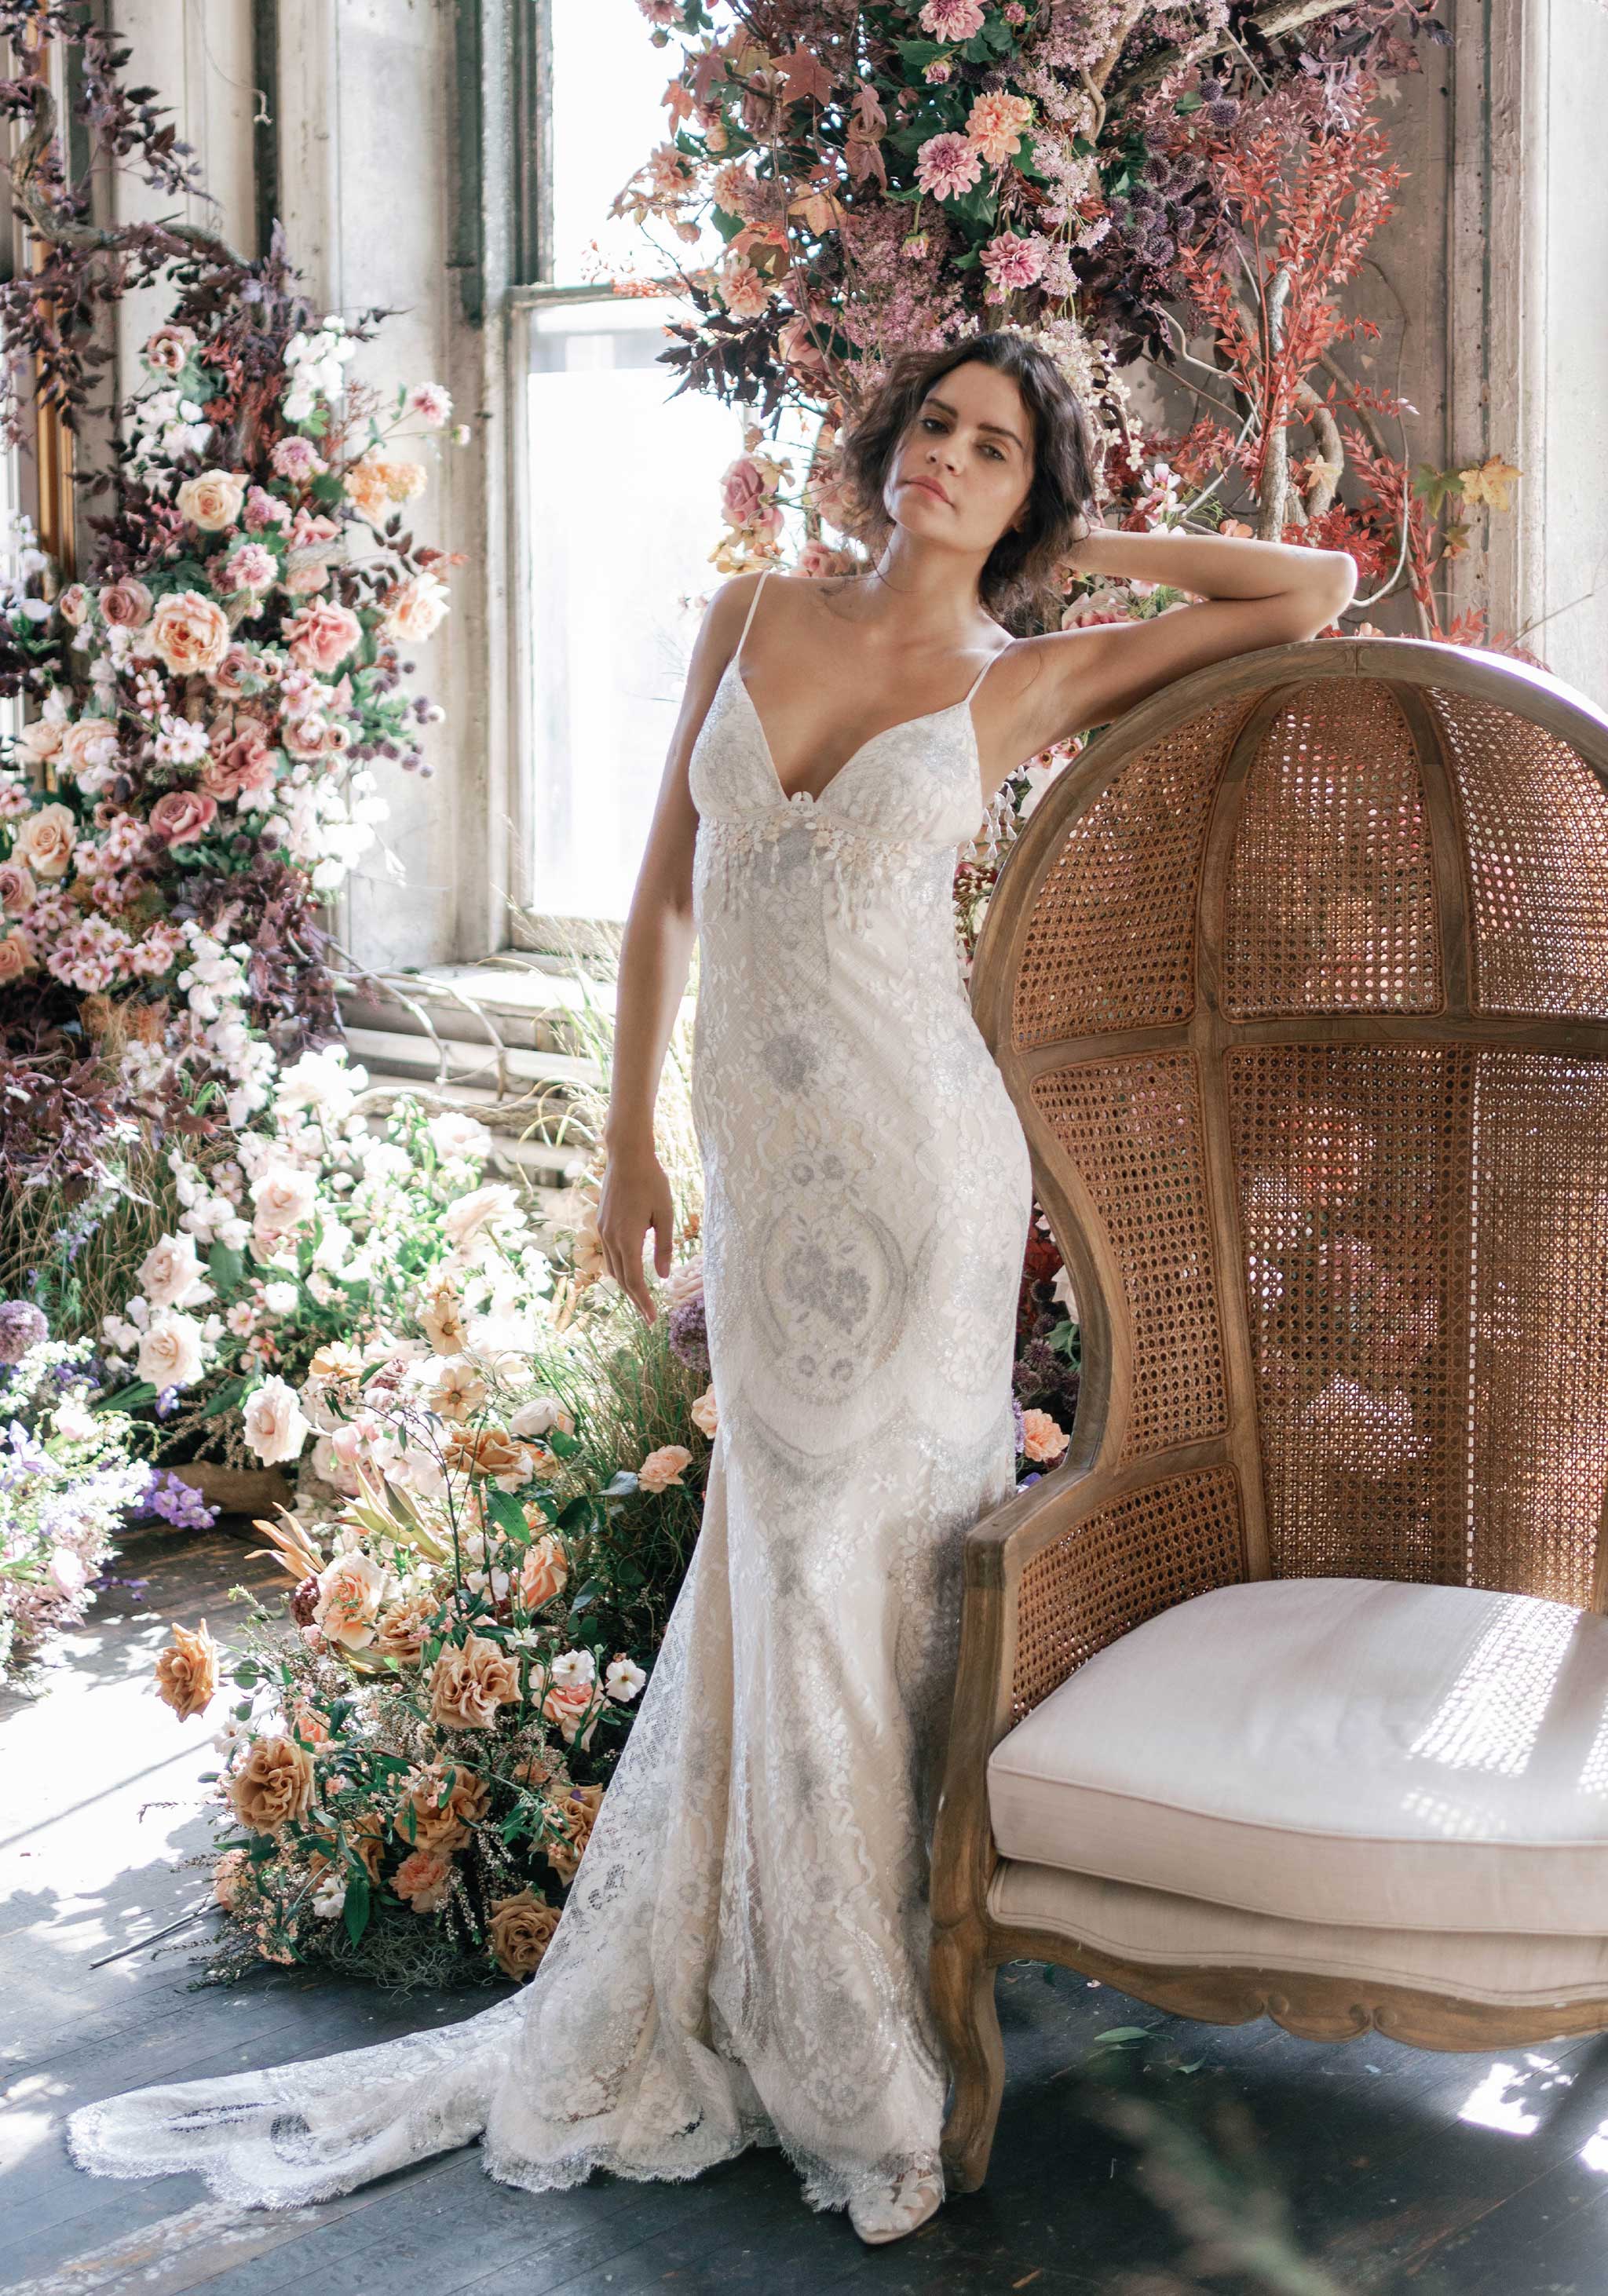 Briolette lace low back wedding dress from Claire Pettibone